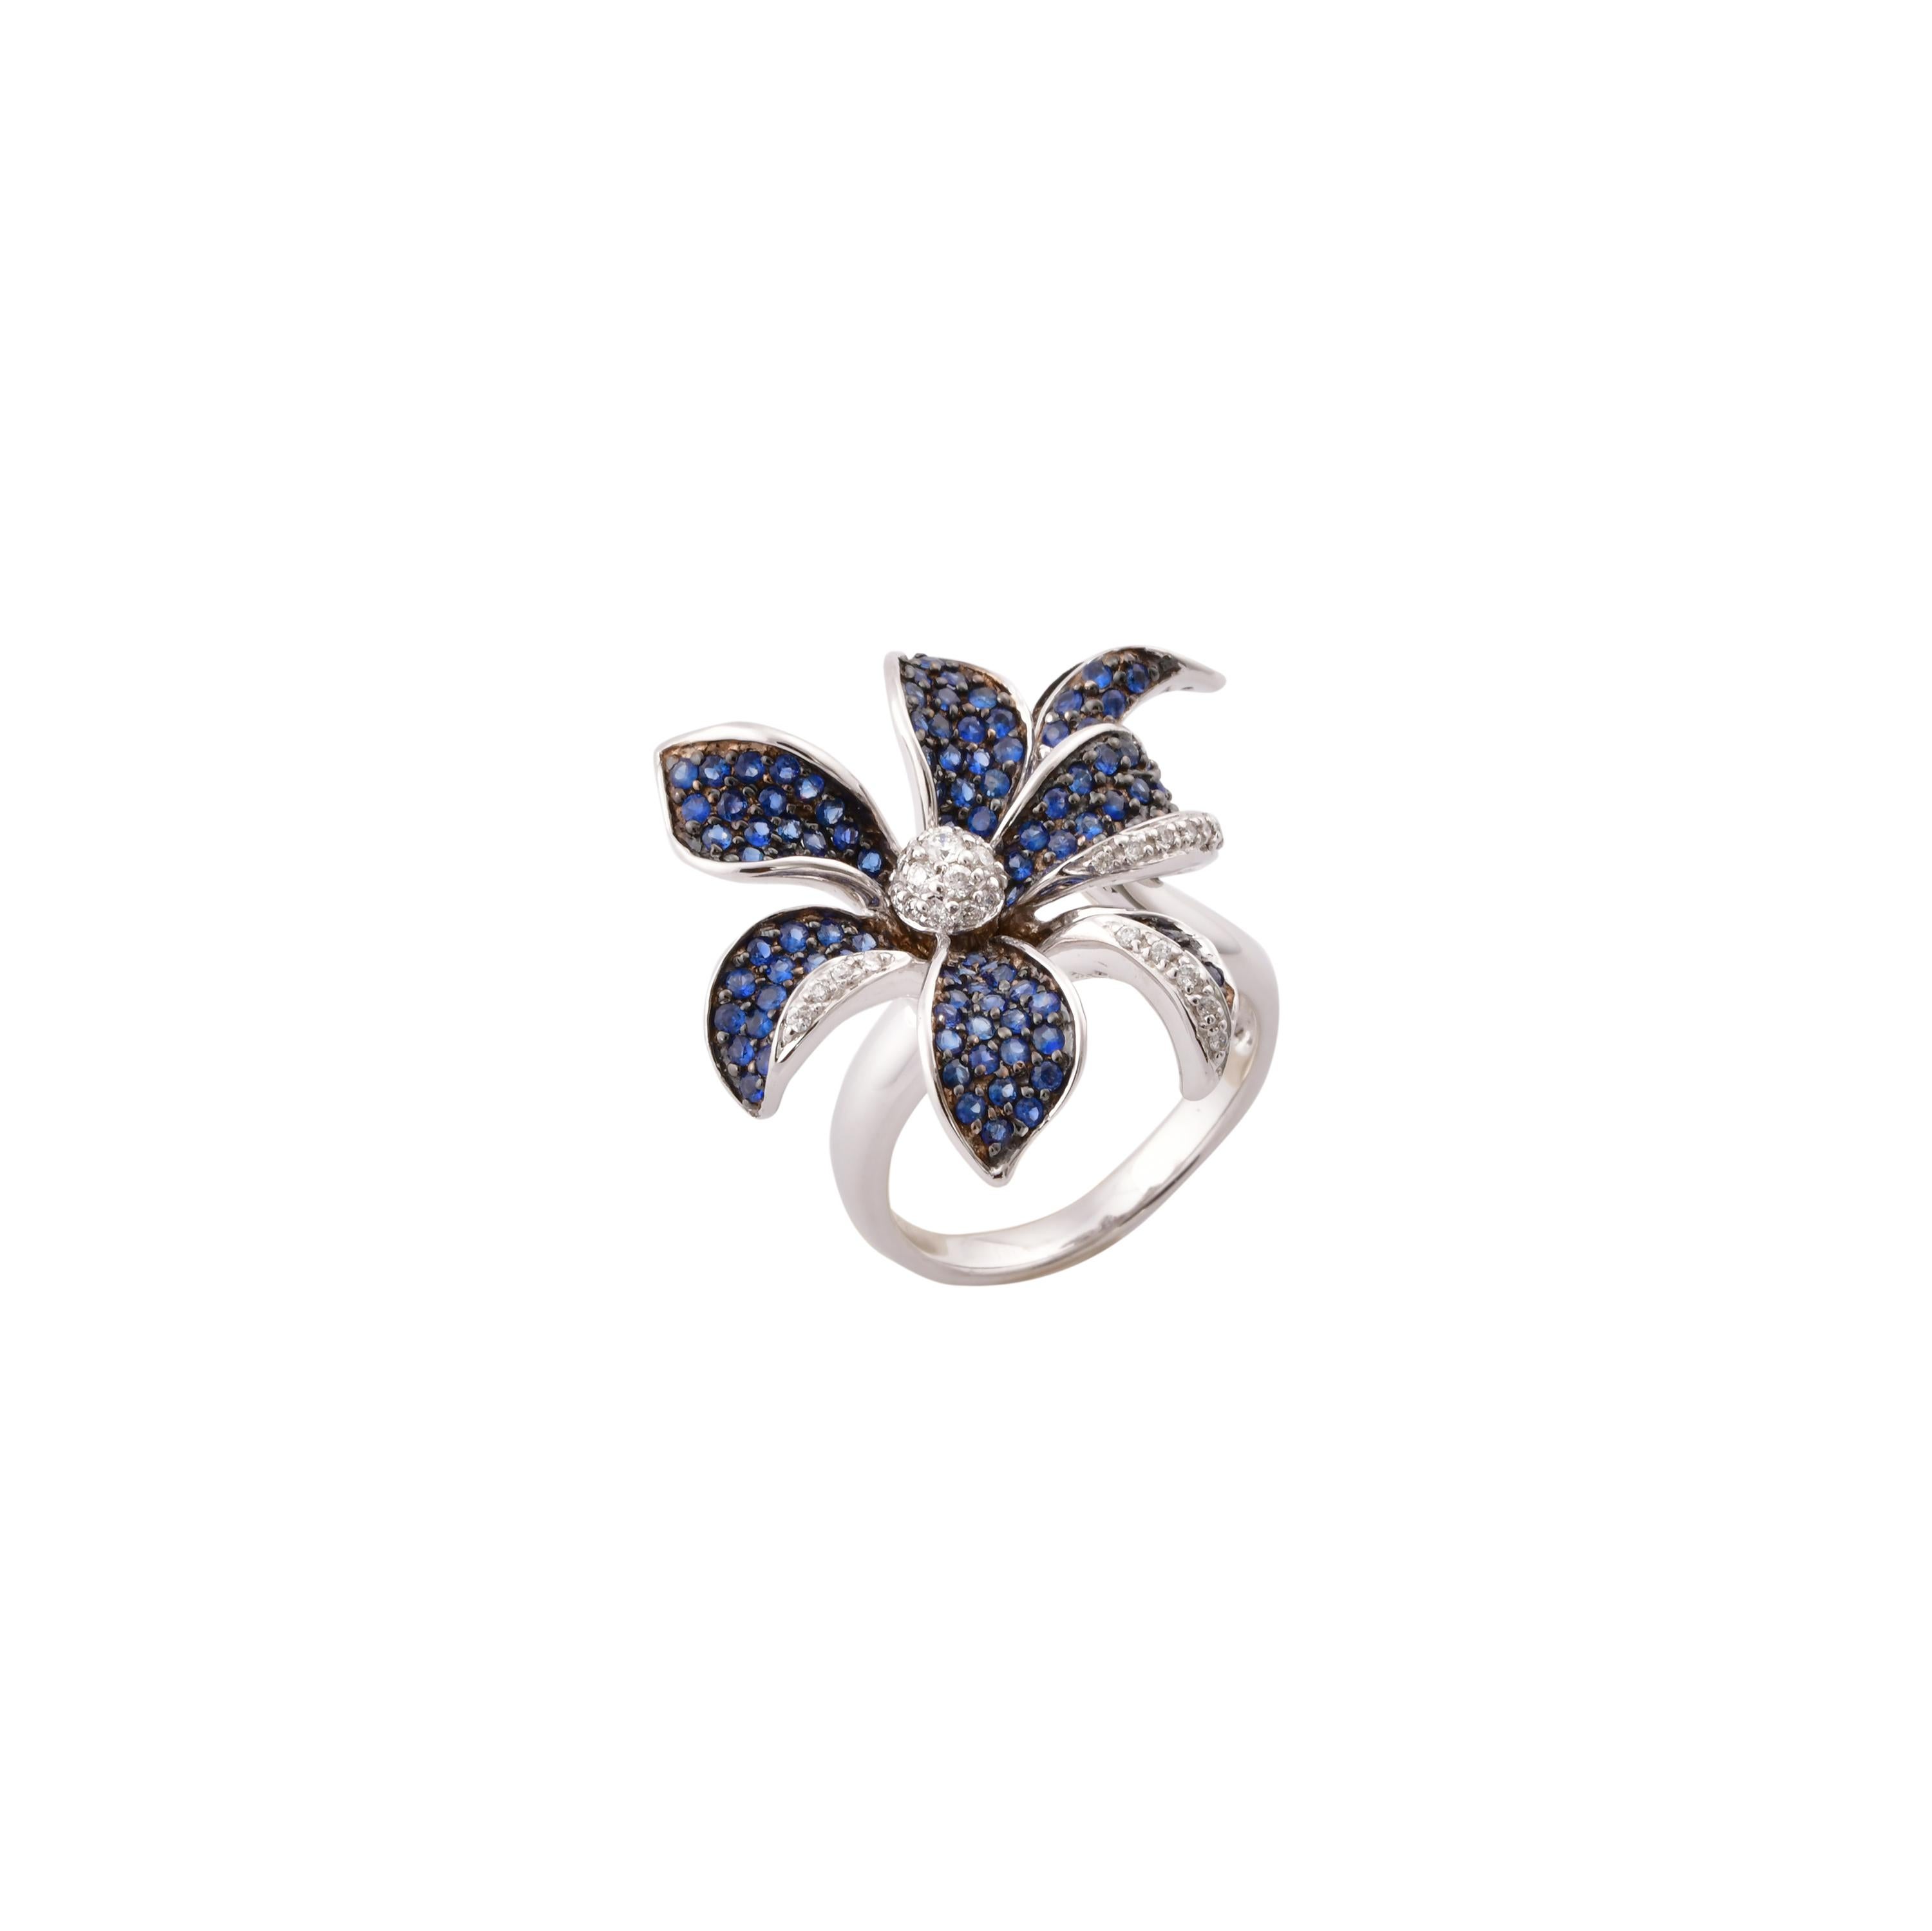 Floral 1.7 Carat Blue Sapphire and Diamond Ring in 14 Karat White Gold 2